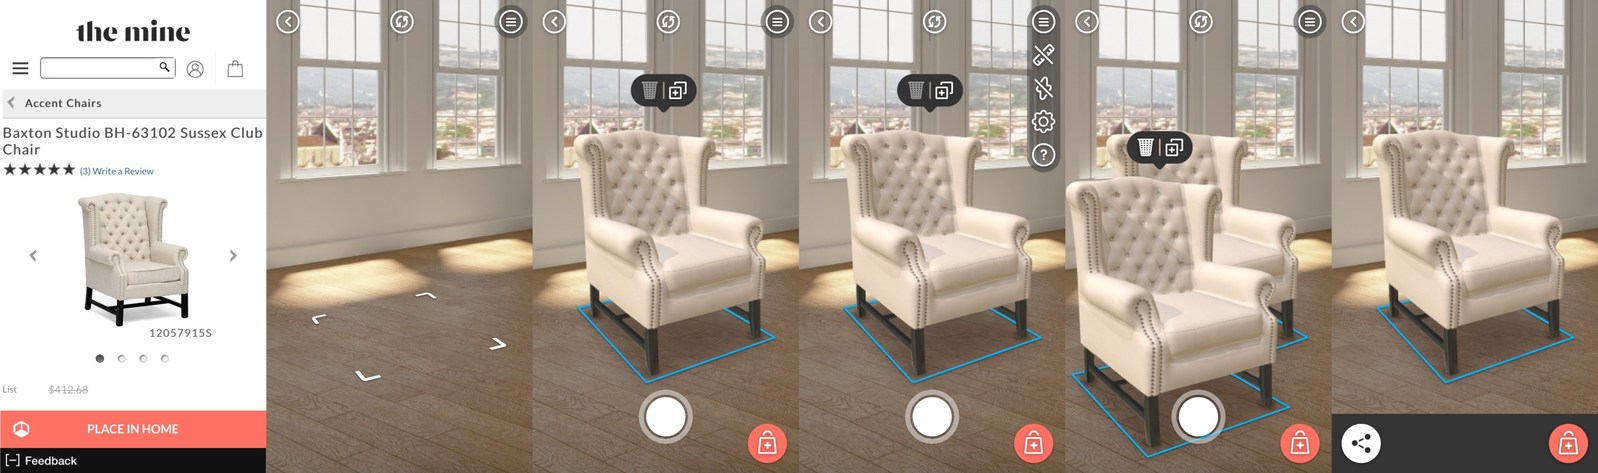 Envisioned by The Mine allows users to view digital products from The Mine, a premier online destination for luxury home furnishings and Lowe’s Company, at scale, in their own space, leveraging new augmented reality capabilities Apple introduced with ARKit. (Lowe's)